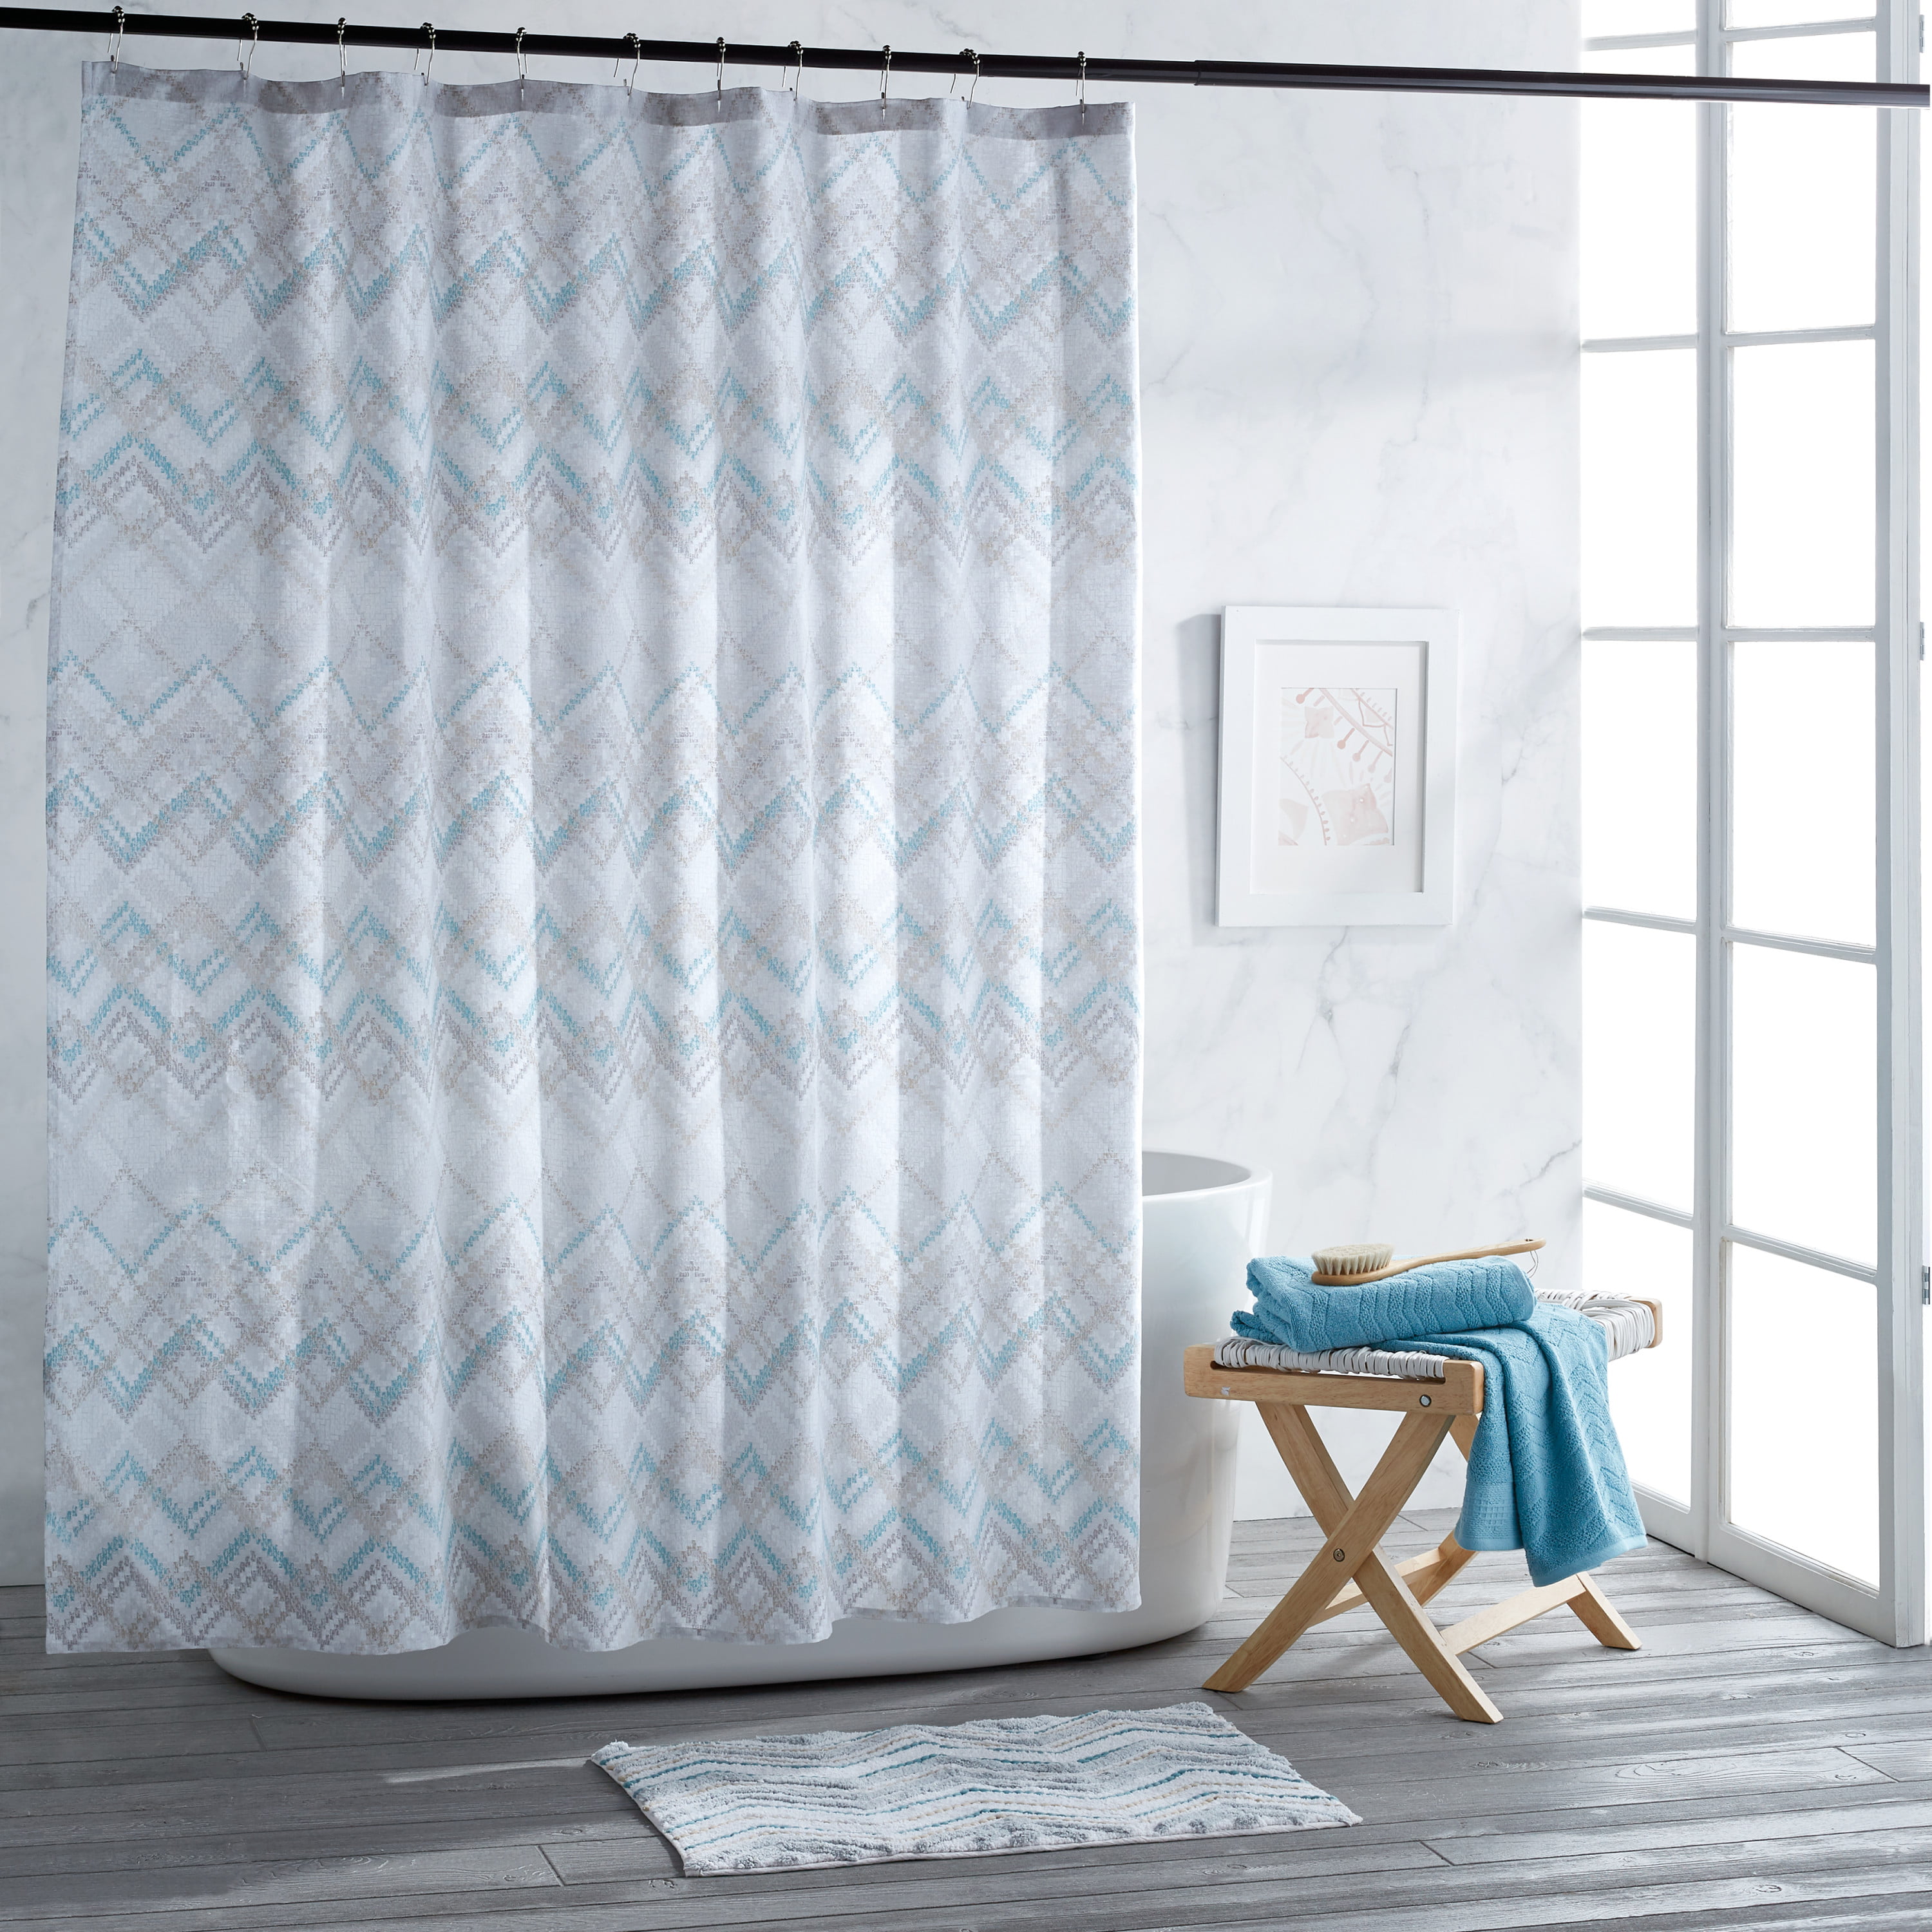 Chevron Waffle Grey Water Resistant Polyester Fabric Shower Curtain Set 180x180 